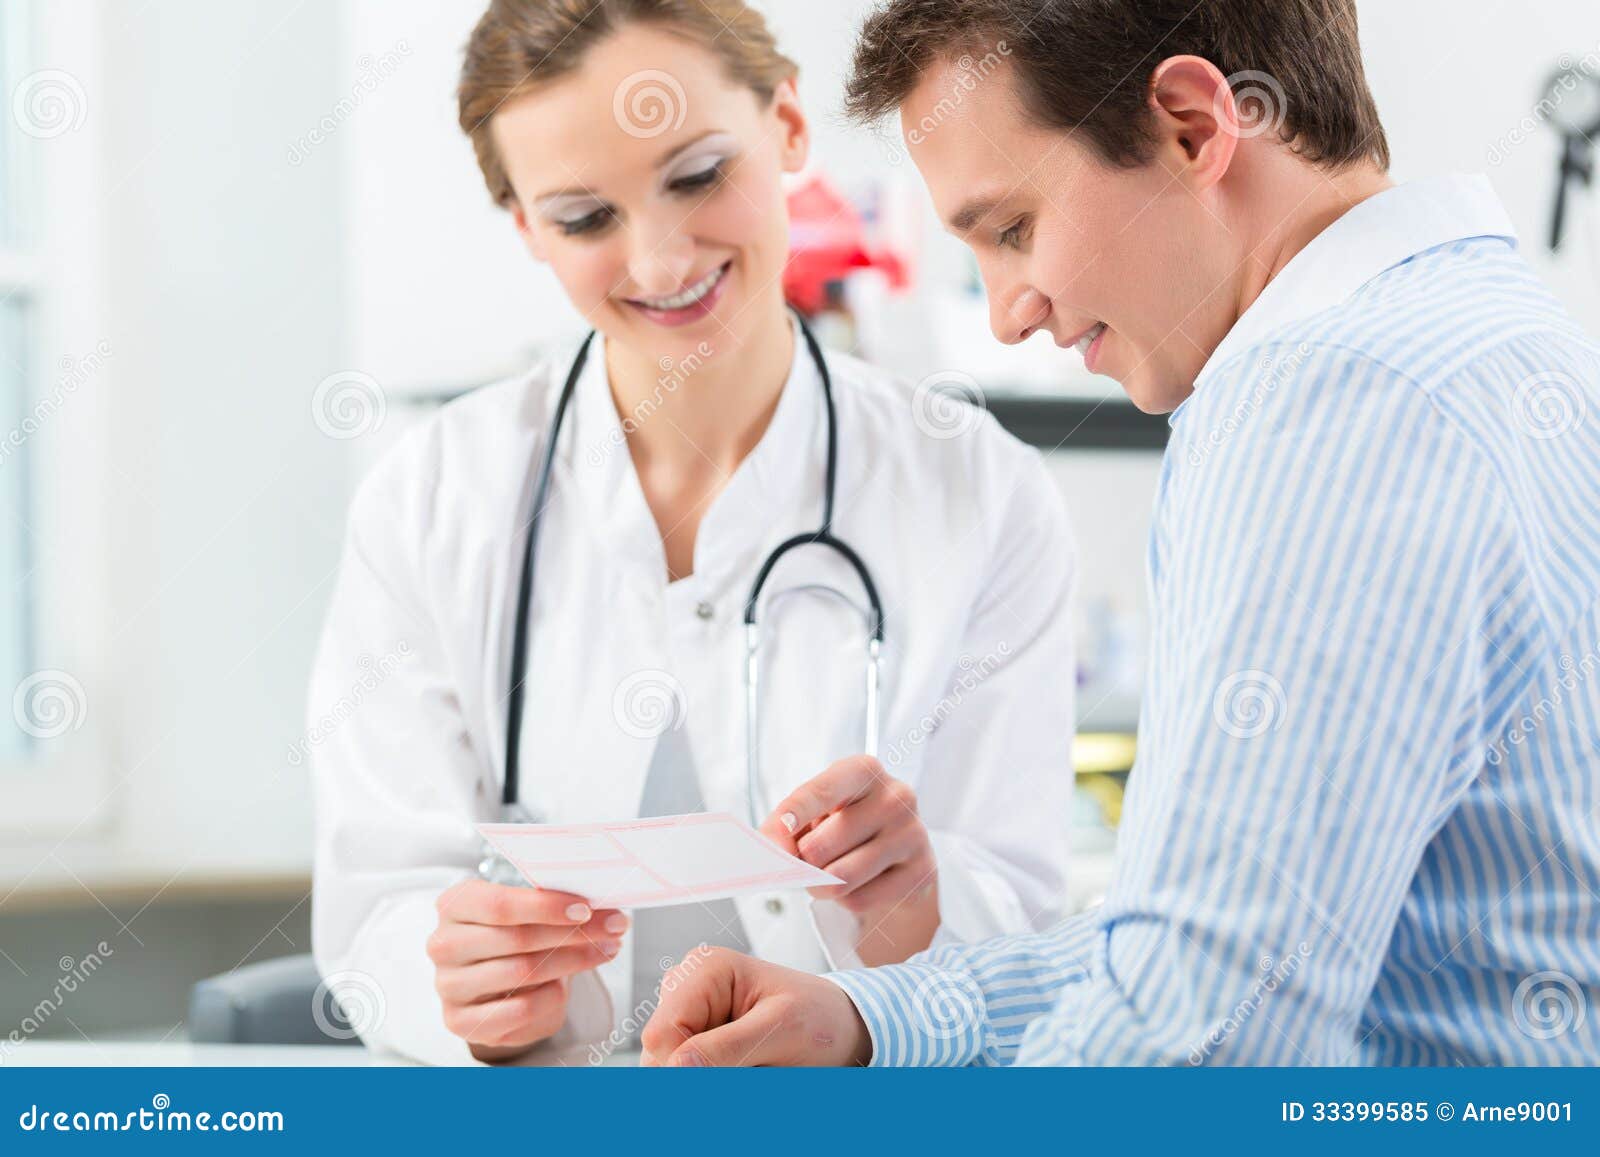 doctor with patient in clinic consulting